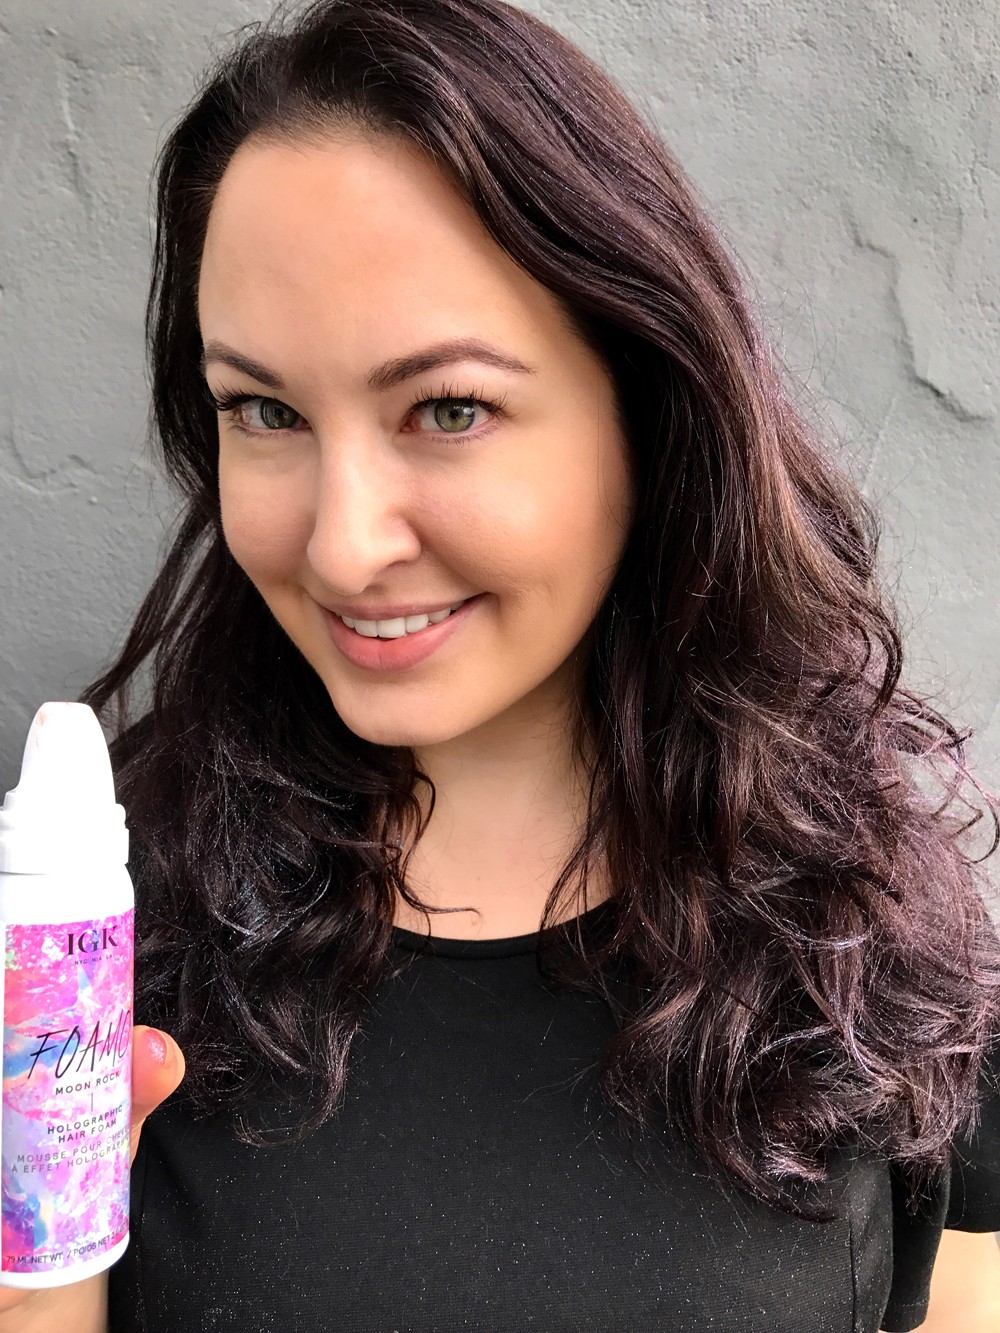 IGK Foamo Glitter Holographic Hair Foam Review - IGK Cruelty Free Hair Product Hits and Misses by popular Los Angeles cruelty free beauty blogger My Beauty Bunny